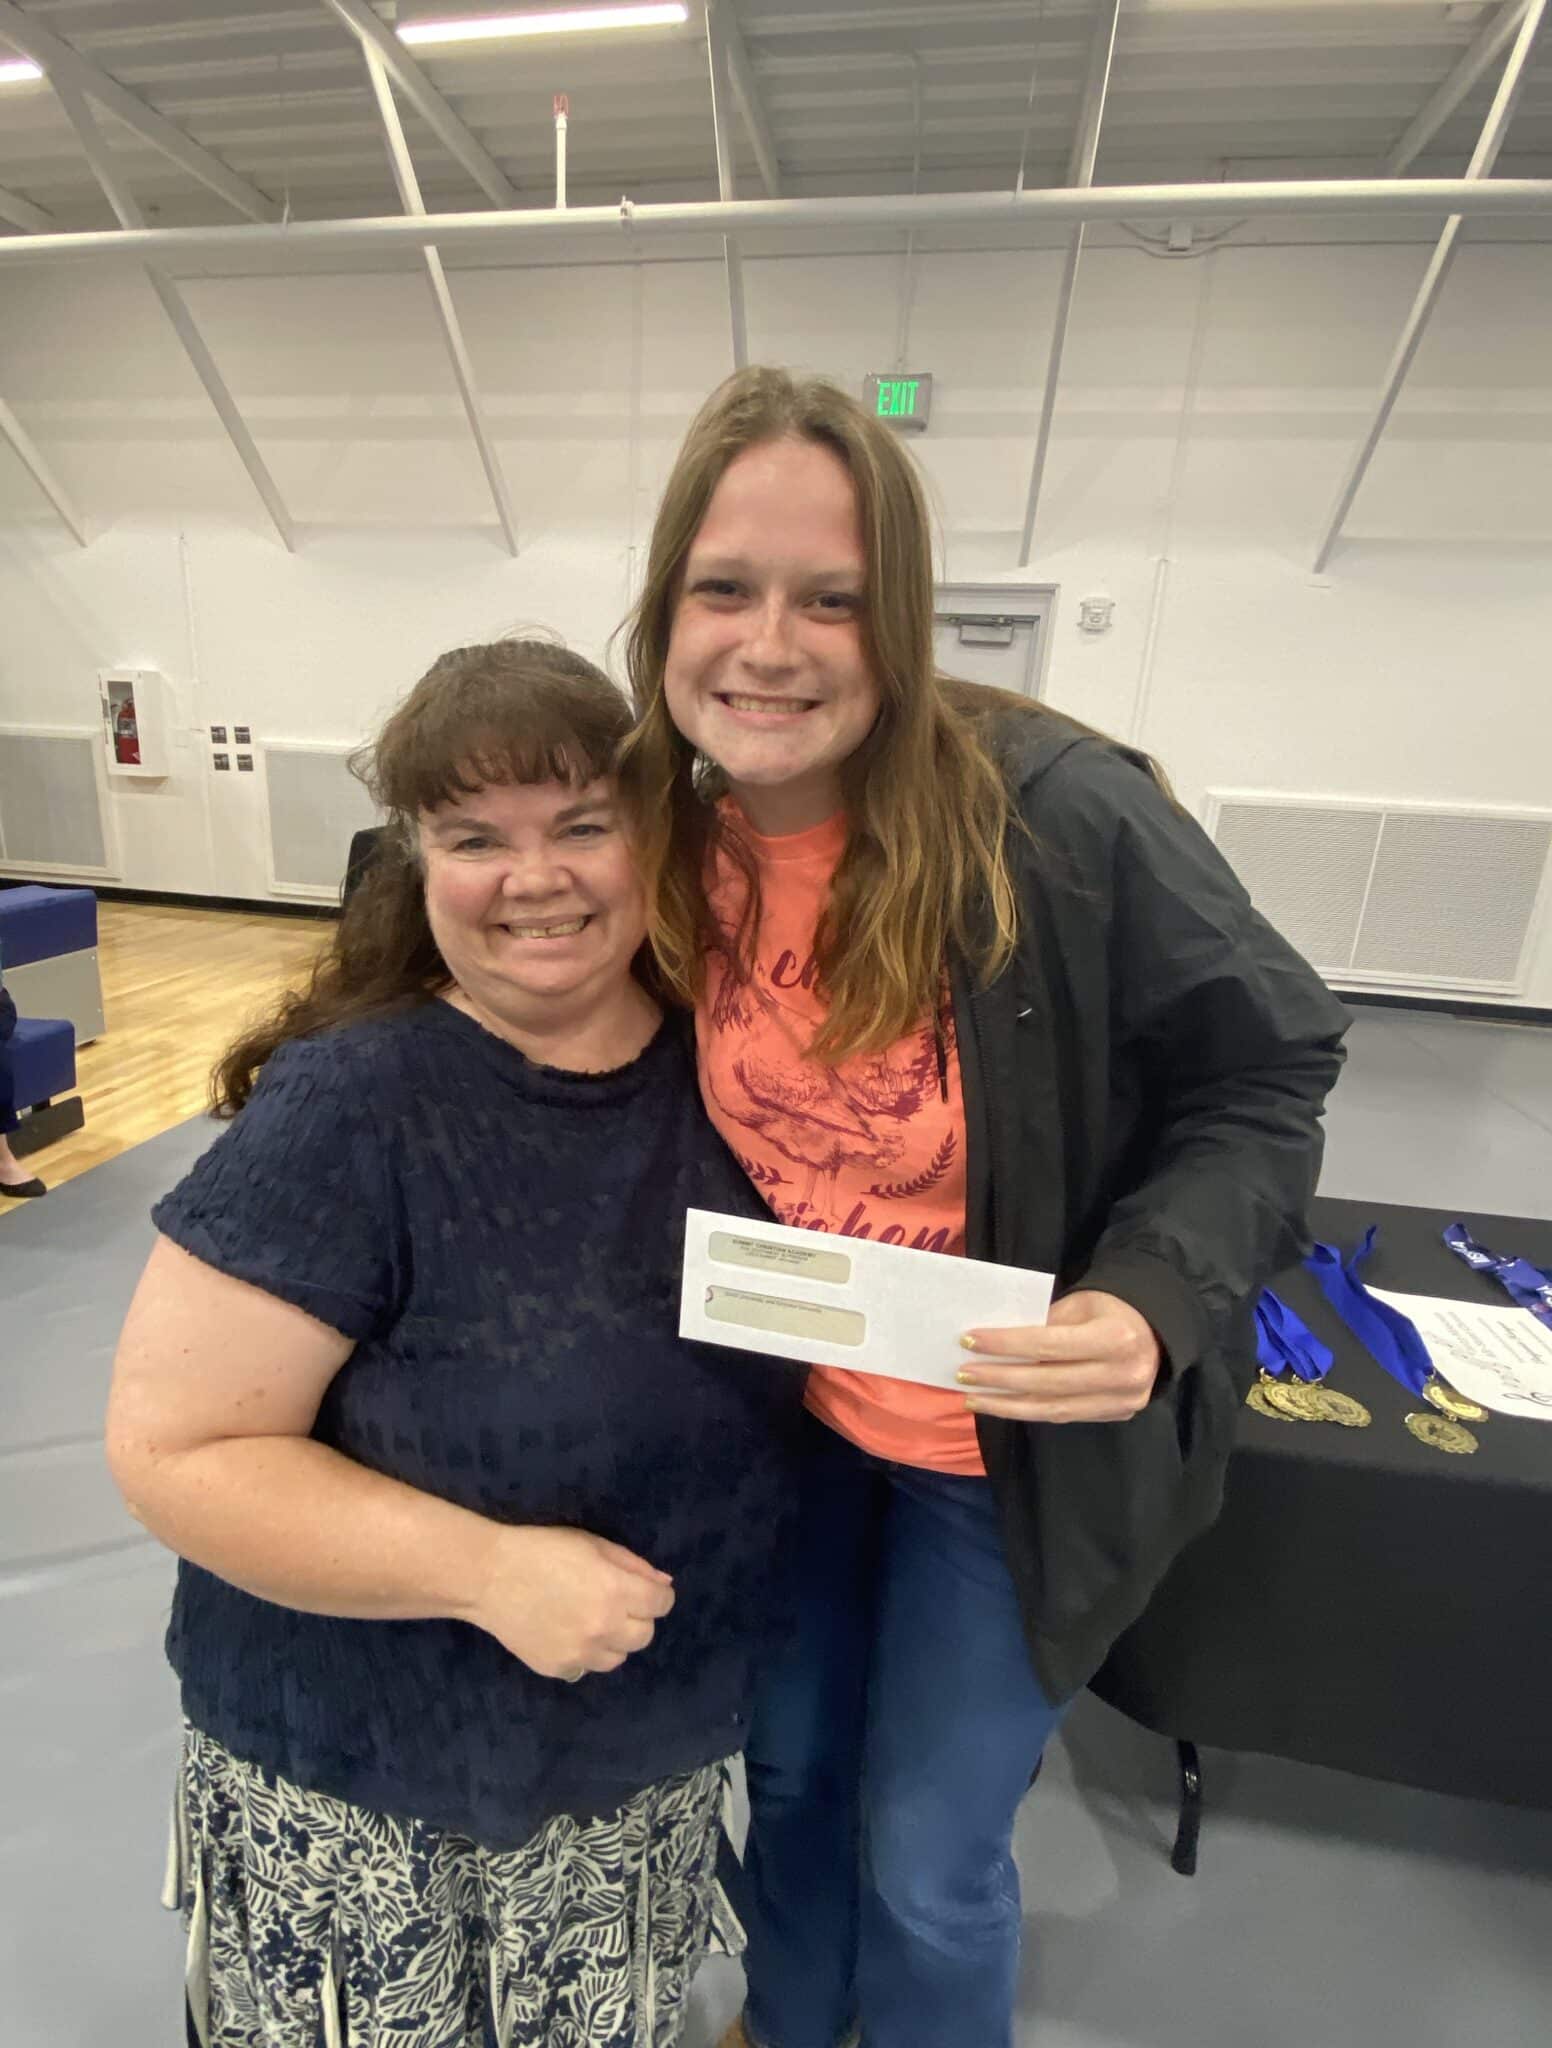 SCA senior Emirson Schooley, pictured with SCA Business Teacher Georgia Duncan, was the recipient of the Summit Christian Academy Entrepreneurship Scholarship for her plan for her farming business “Sunshine Fields.”